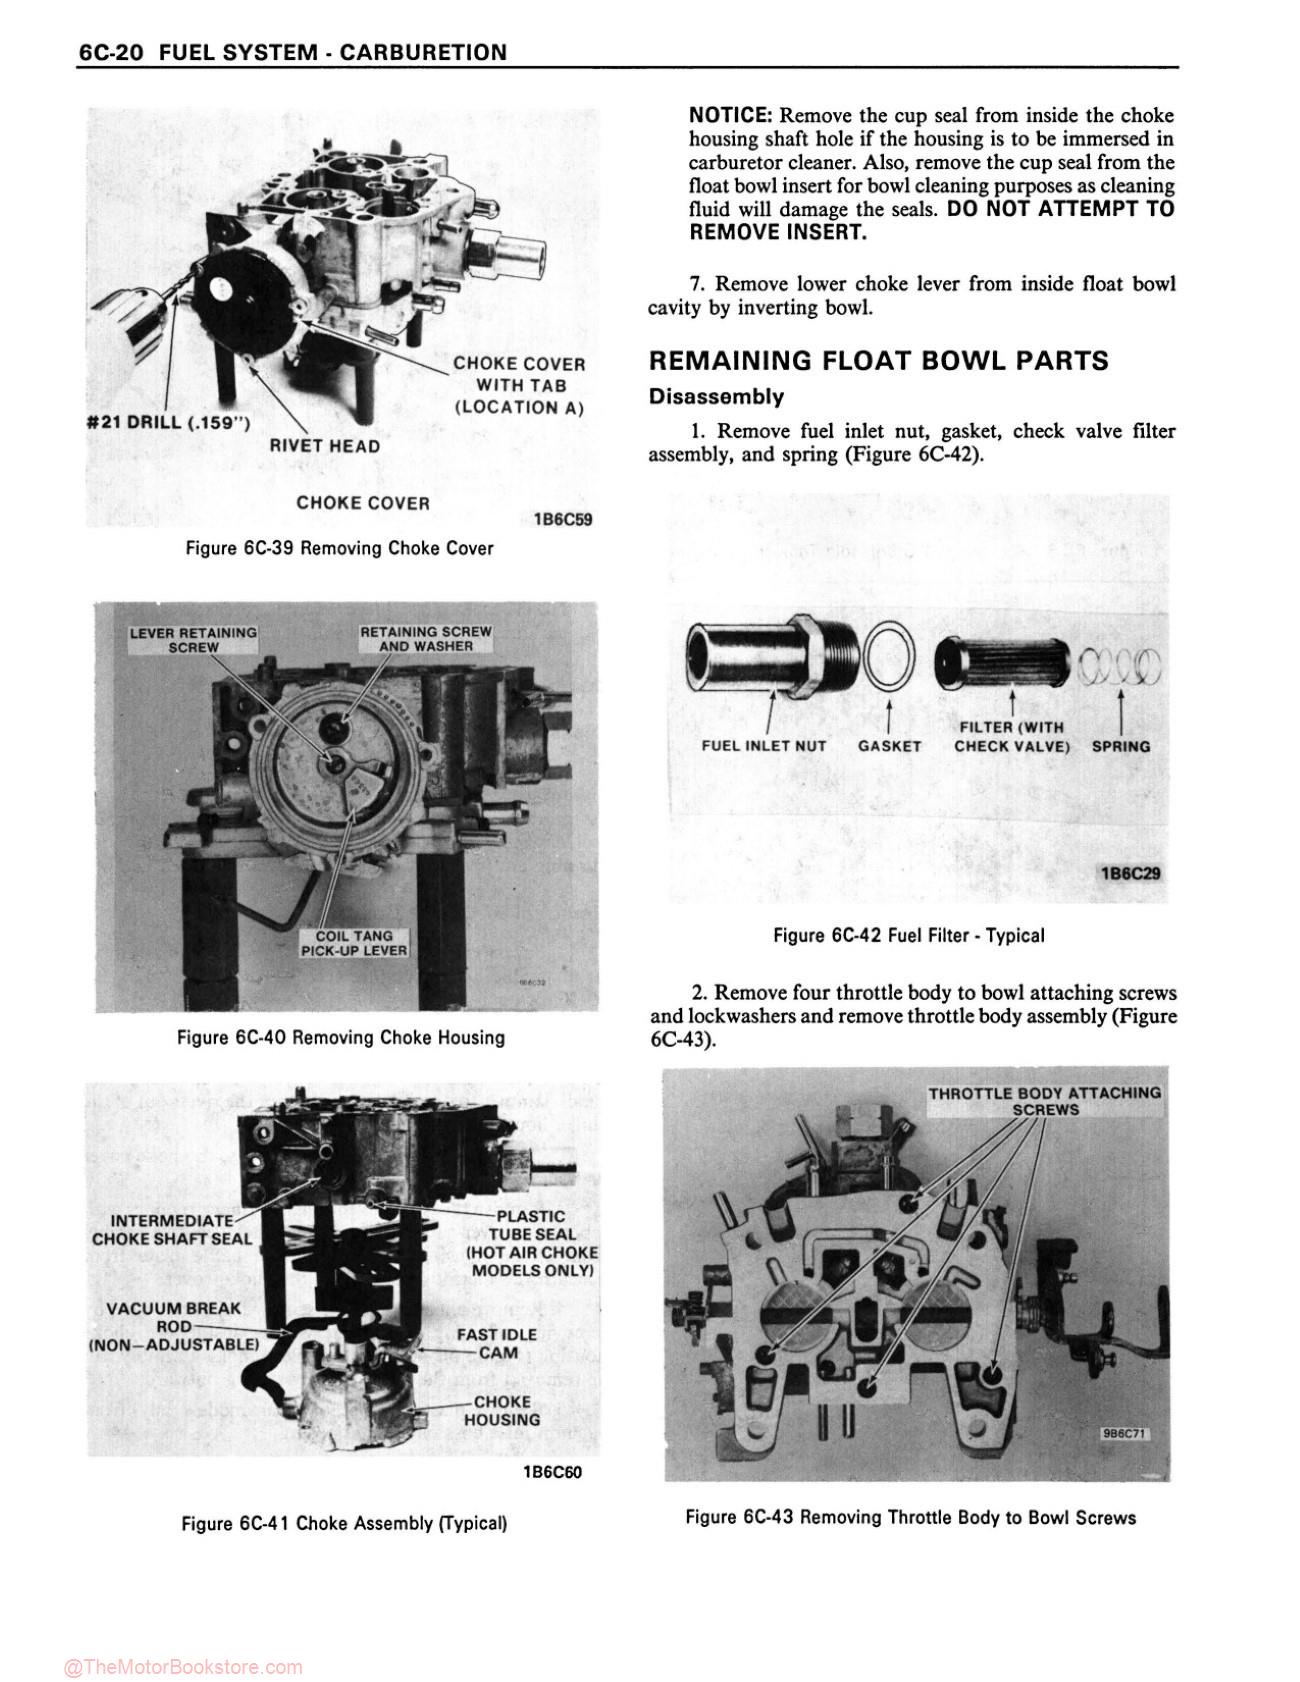 1981 Buick Chassis Service Manual - Sample Page 1